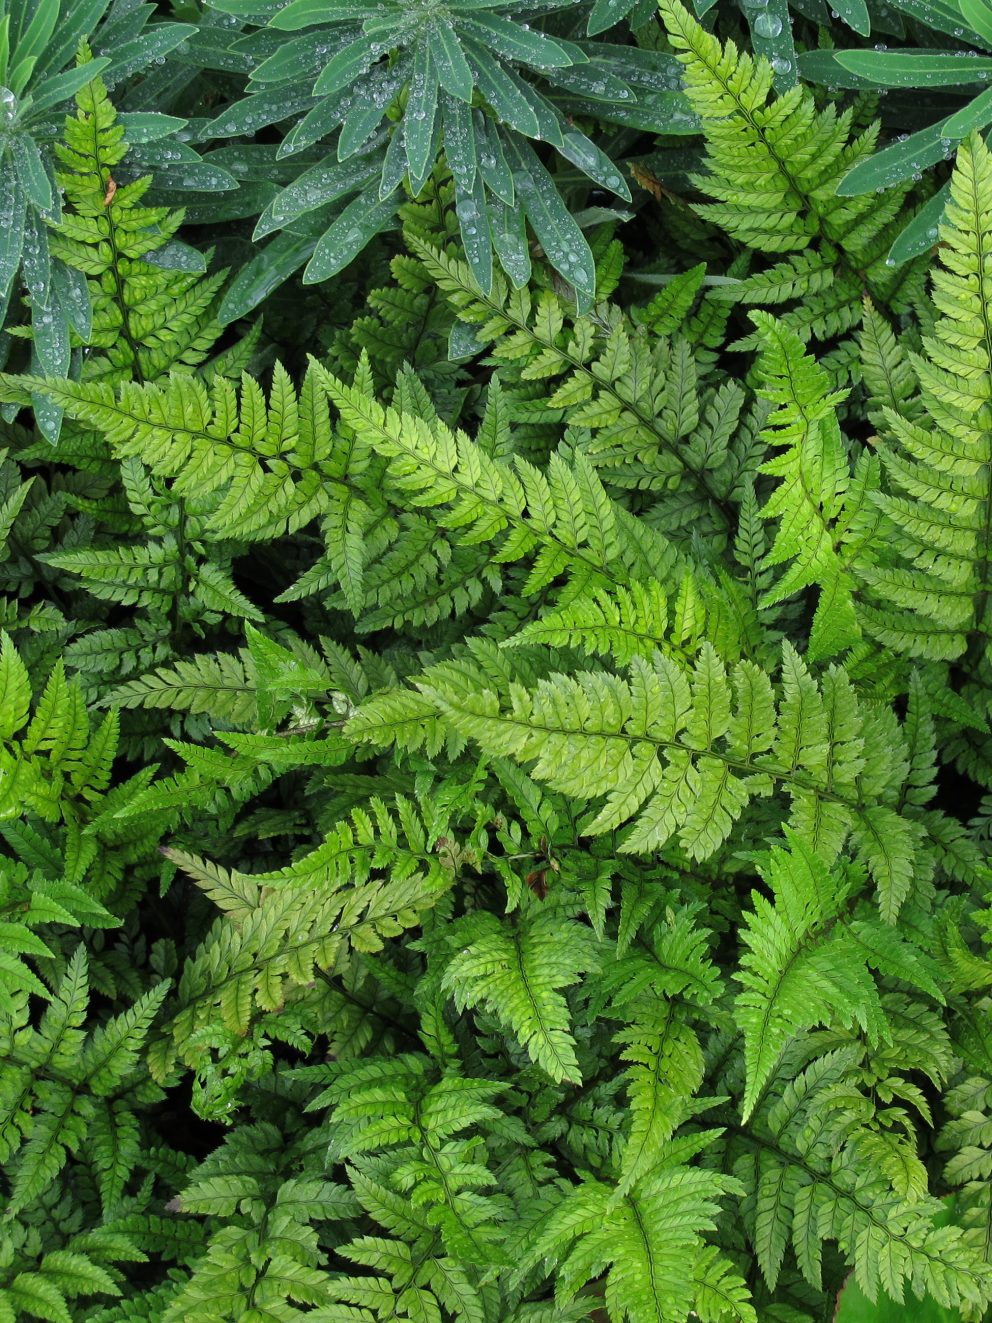 Ordered three of these ferns. Arrived in lovely condition and have established well in my garden in a shady spot (it gets no direct sun due to some high fences). Lovely green fern adding some structure and interest in my small north facing garden. Will order more ferns from this nursery and highly recommend